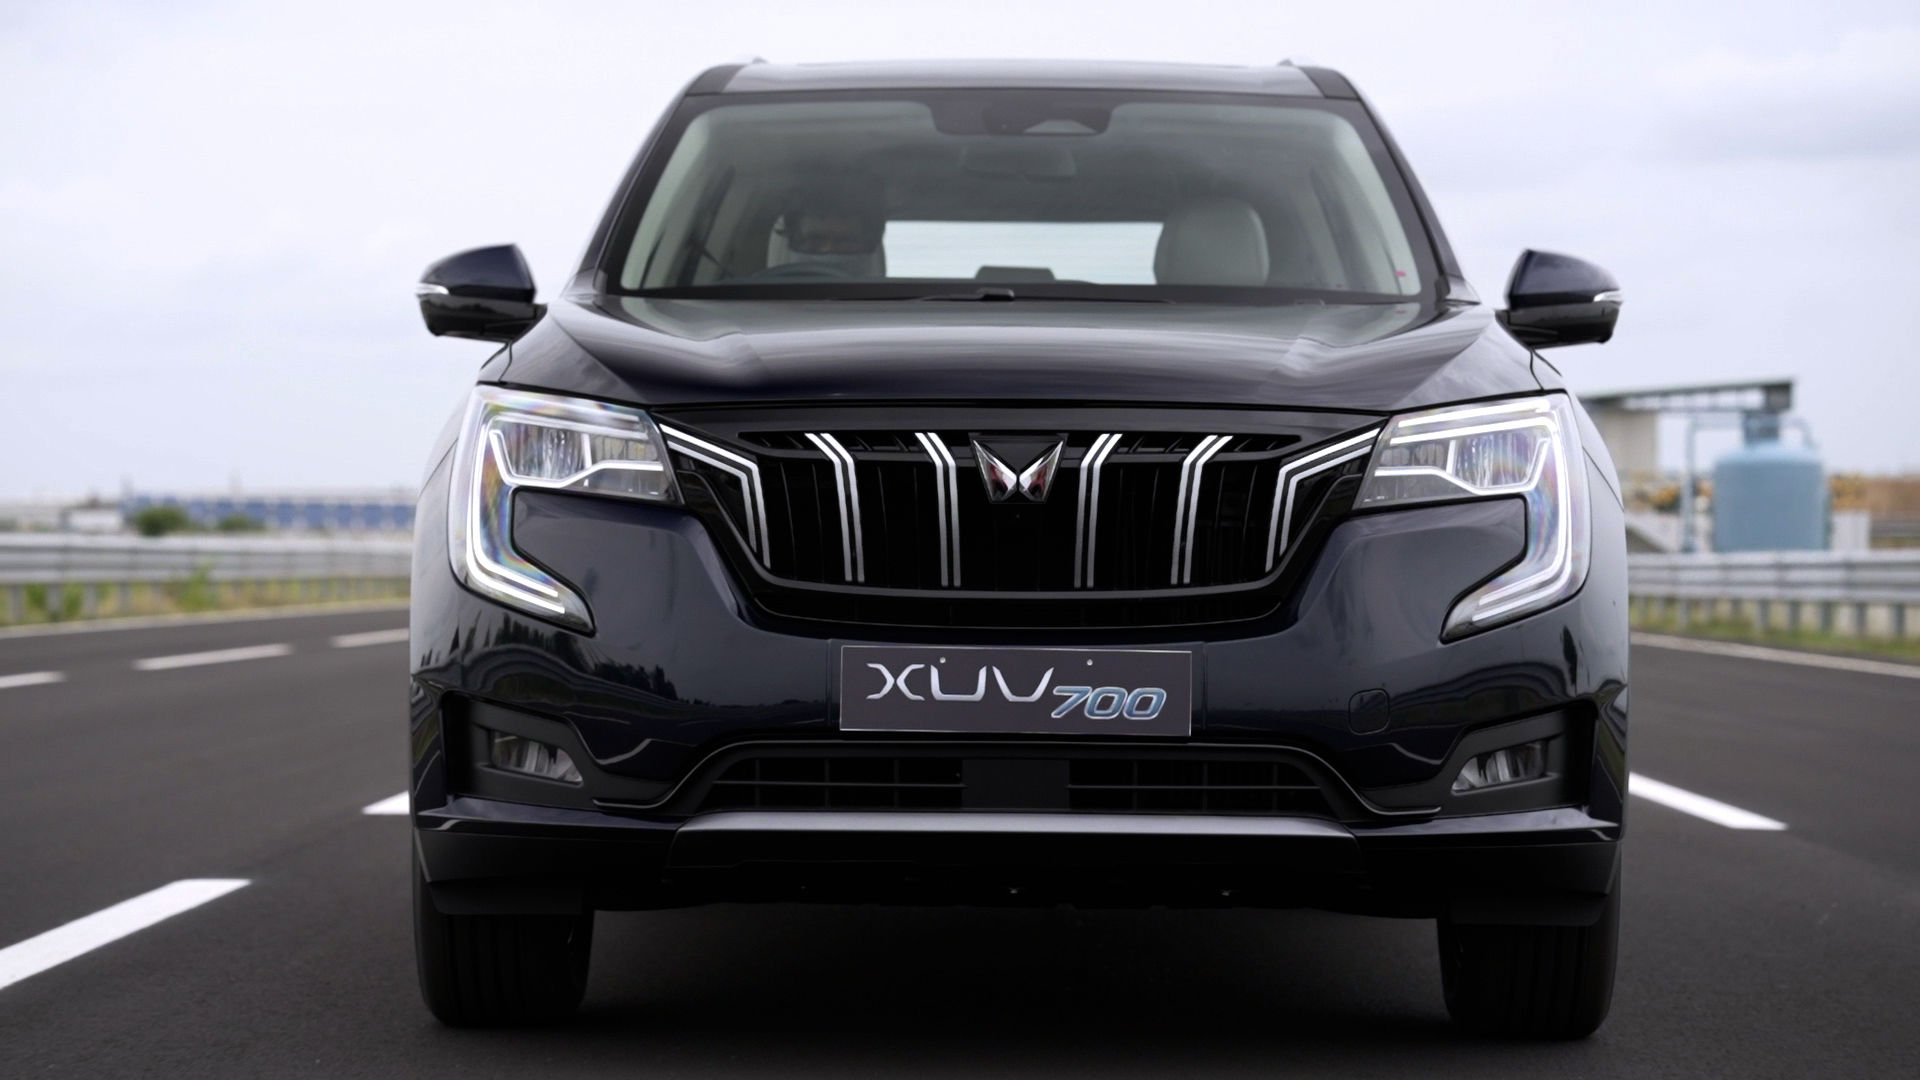 Mahindra XUV700 first drive experience: How different is it from XUV500?